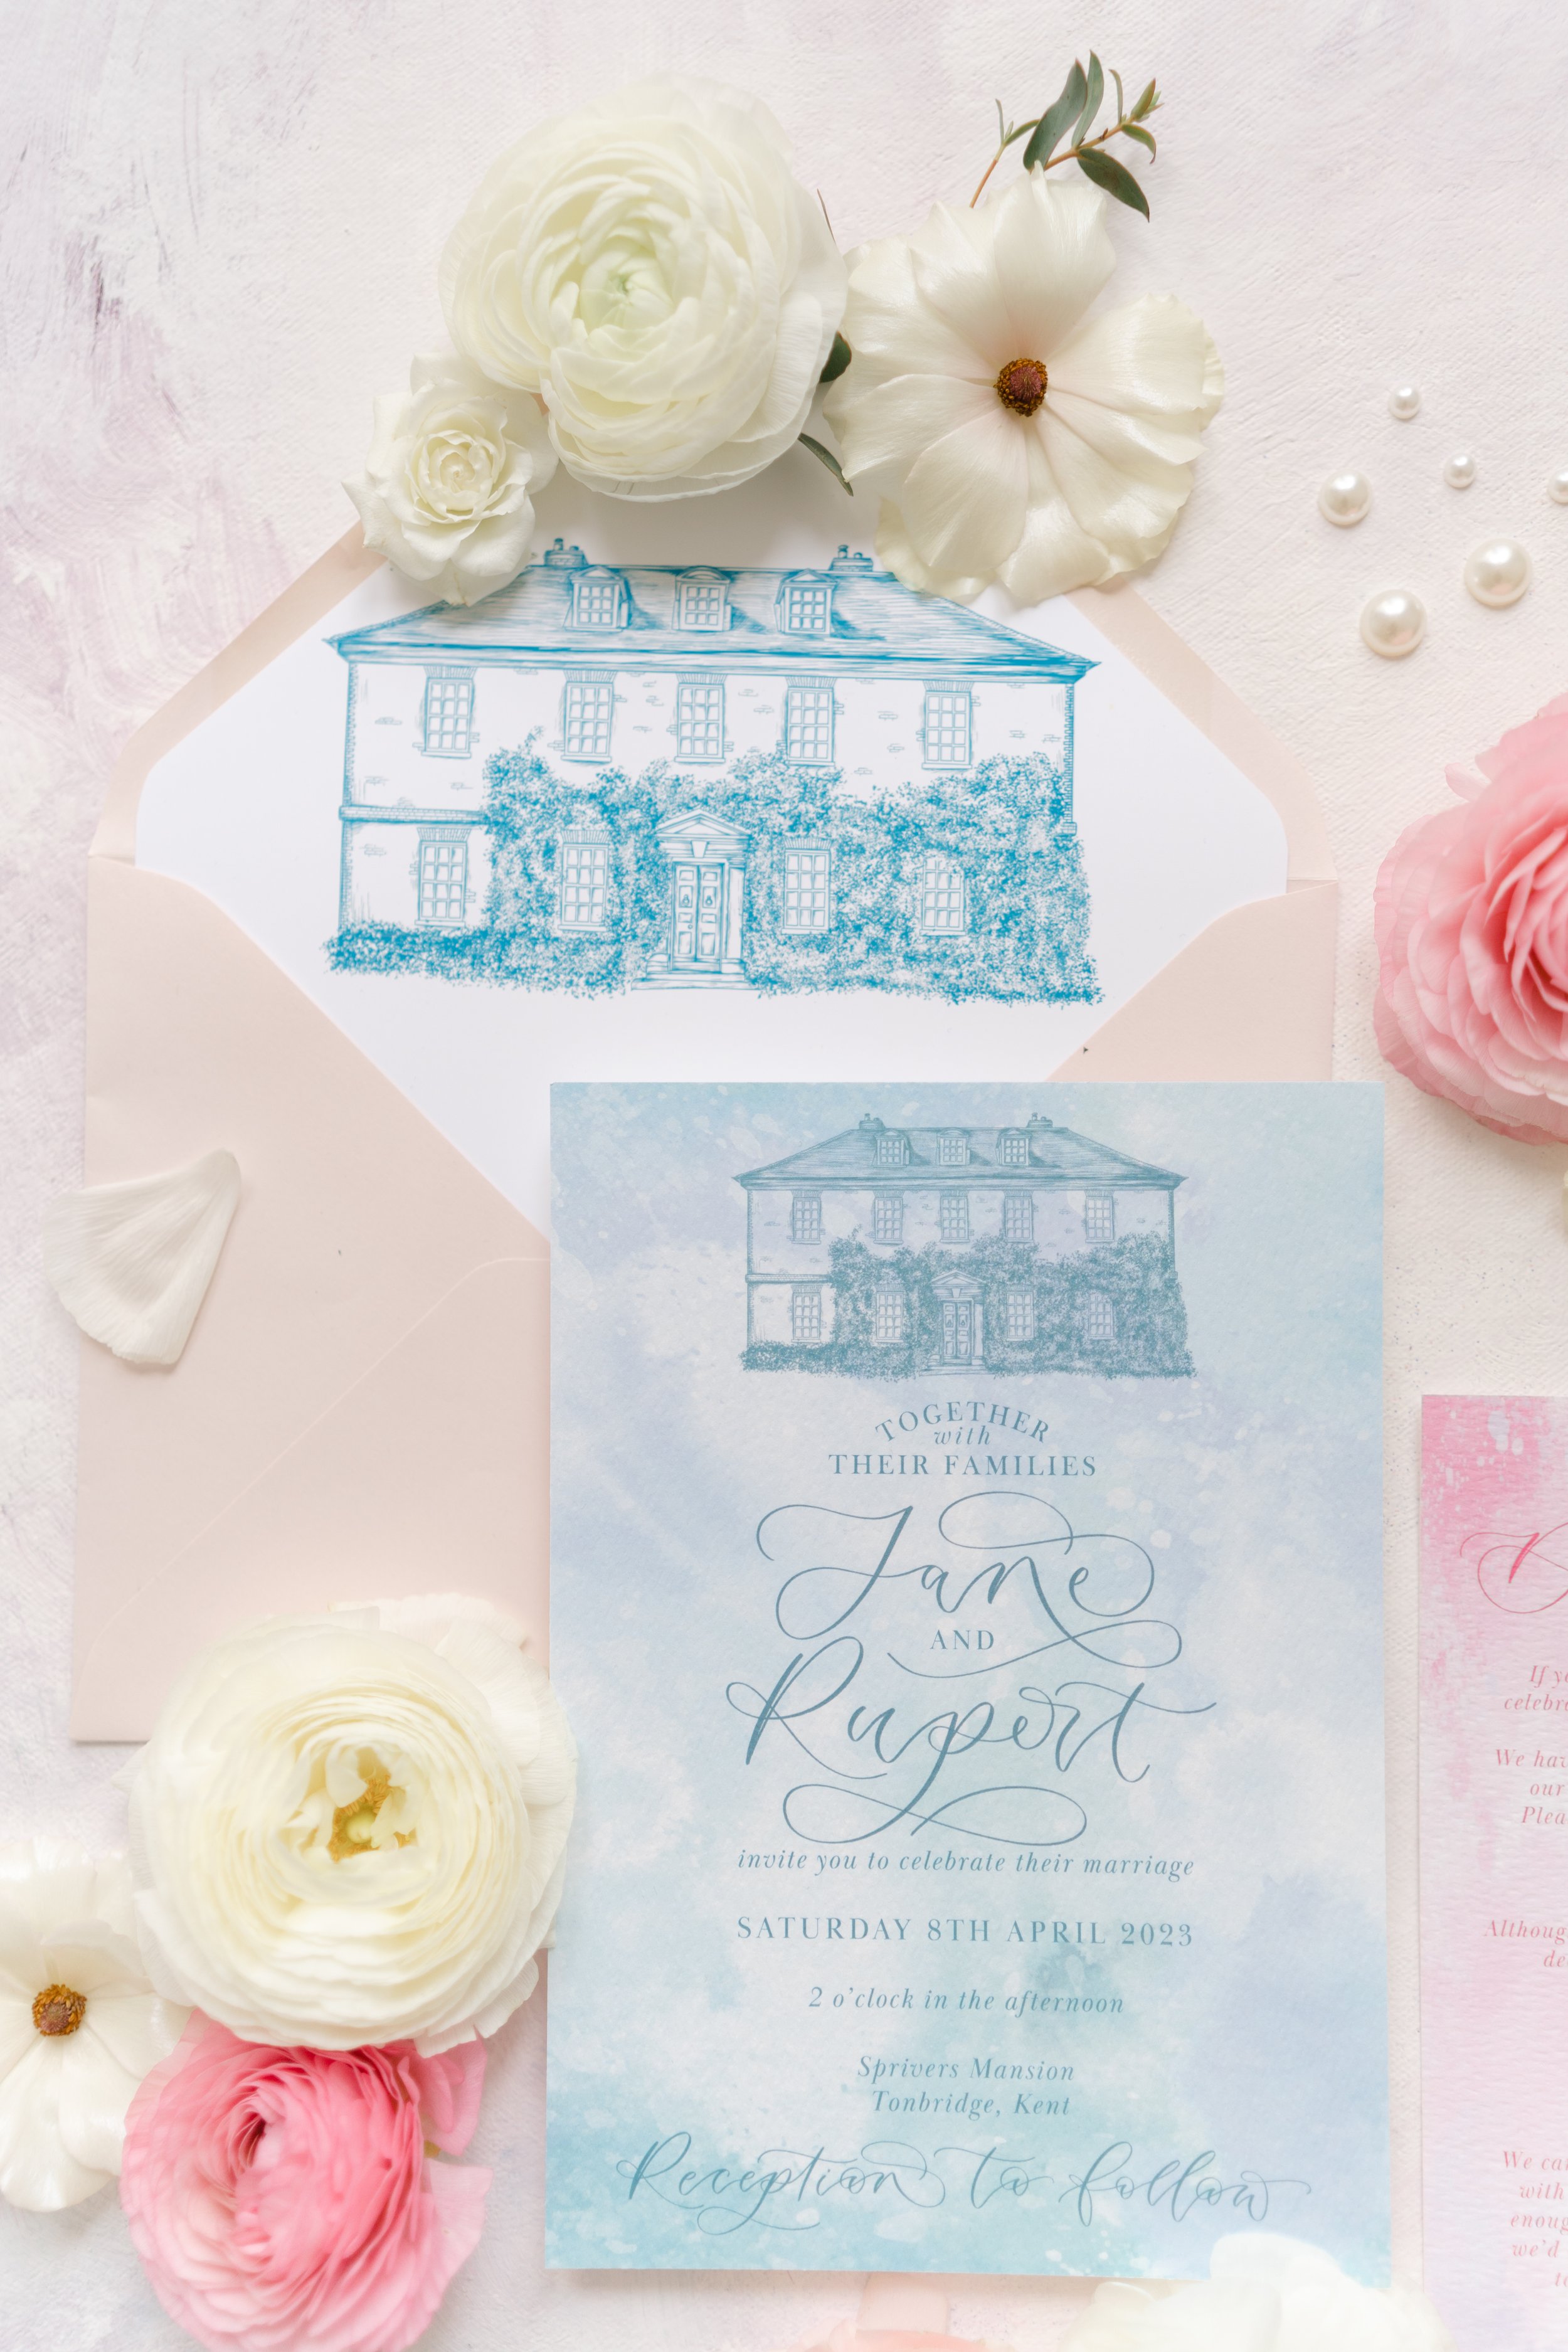 The Amyverse - pastel invitation set with invite, details card, rsvp card with pastel watercolour washes and venue illustration of sprivers mansion - envelope liner with venue drawing.jpg